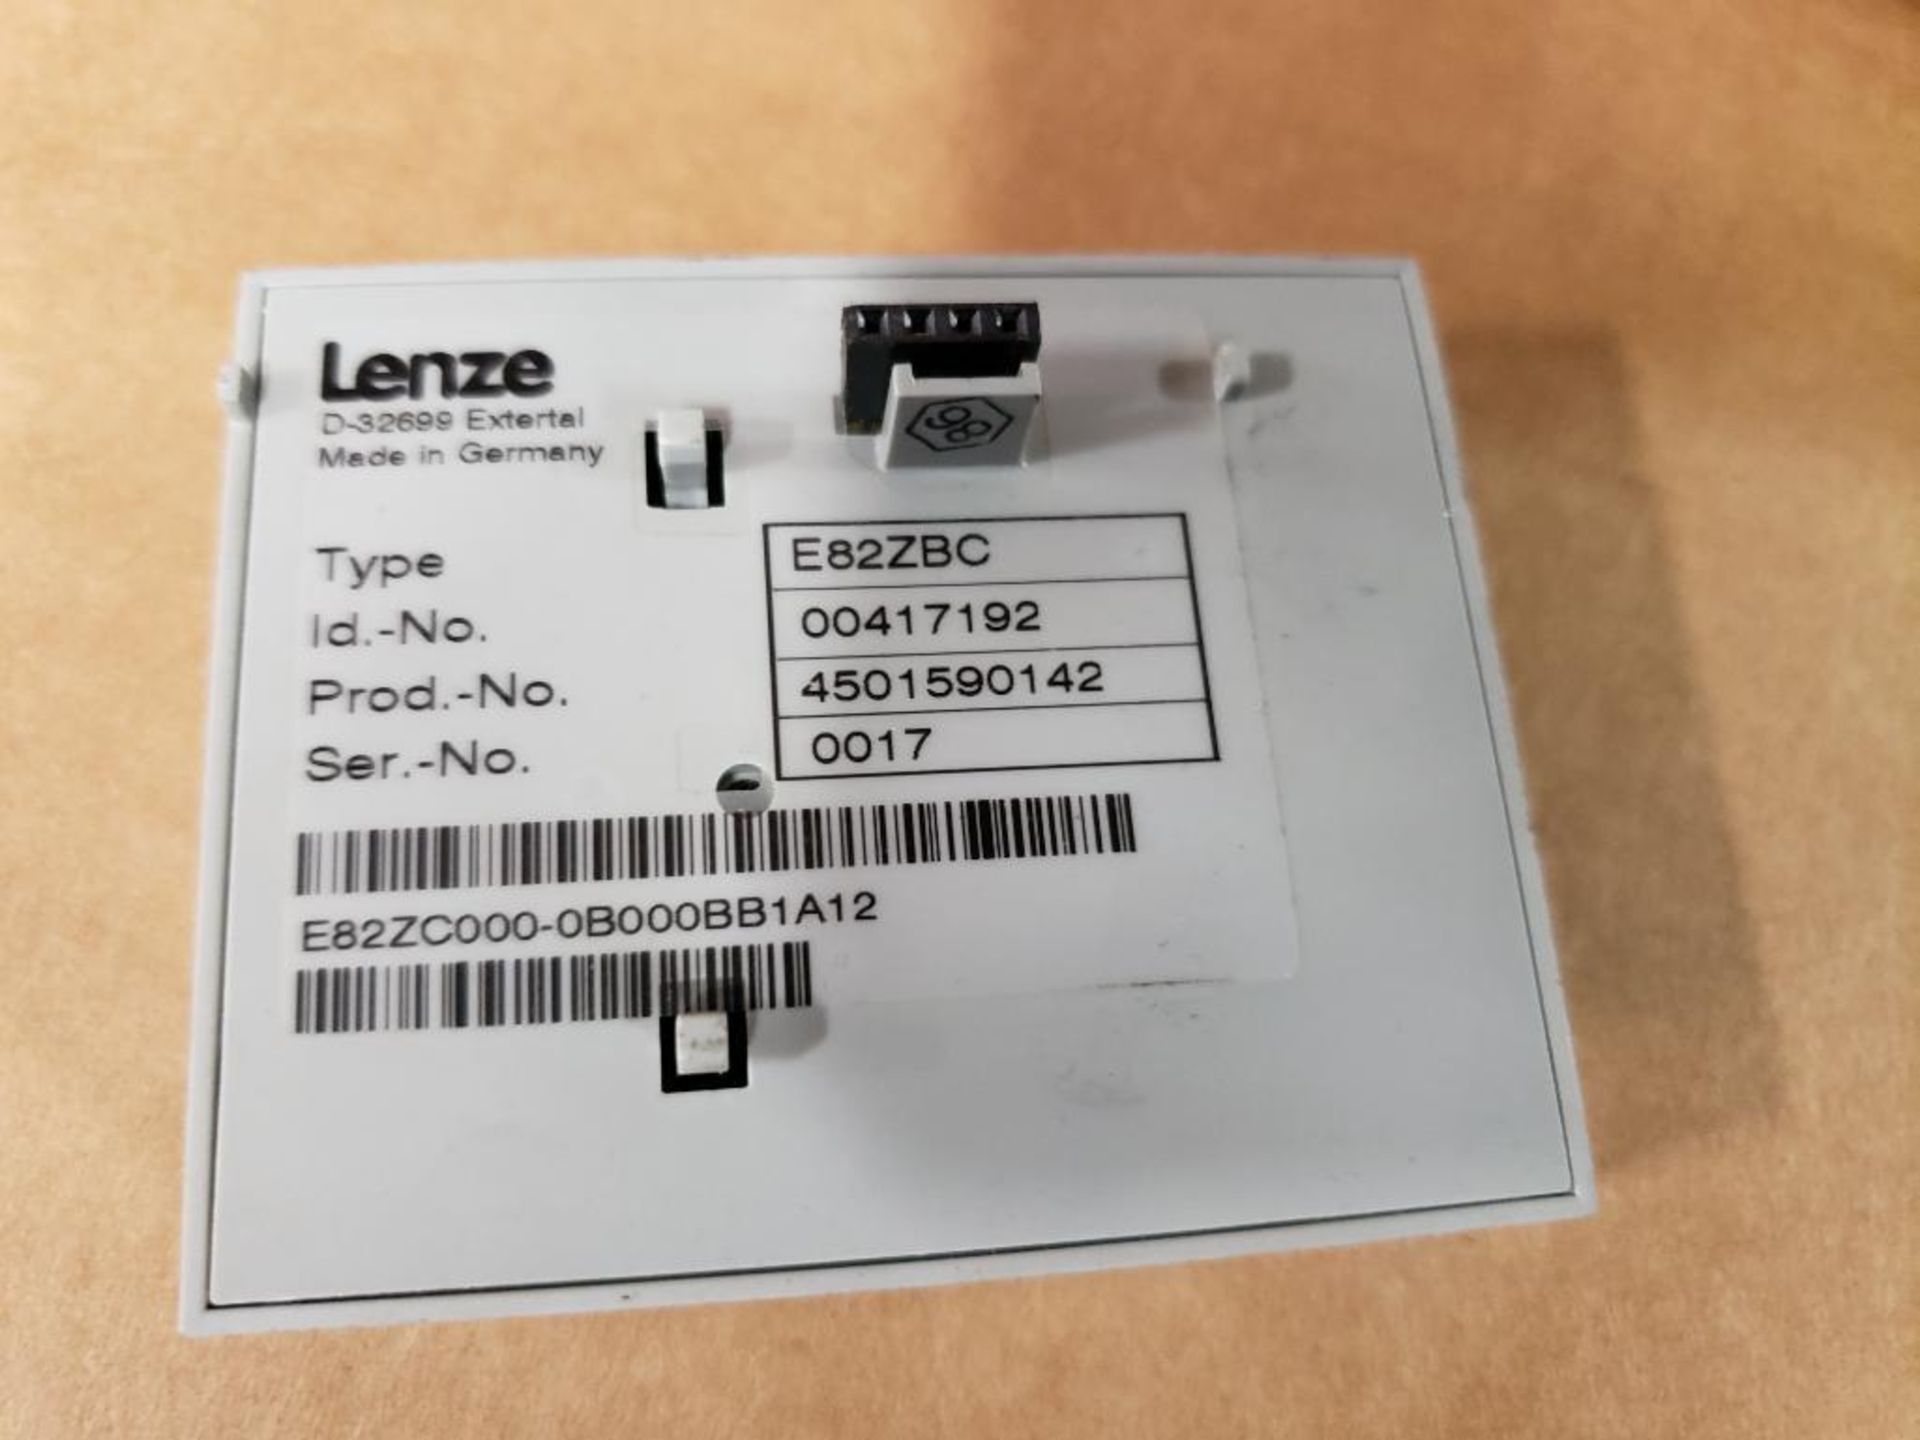 Qty 2 - Lenze 8200 vector drive. Includes Qty 2 - E82ZBC controller. - Image 5 of 5